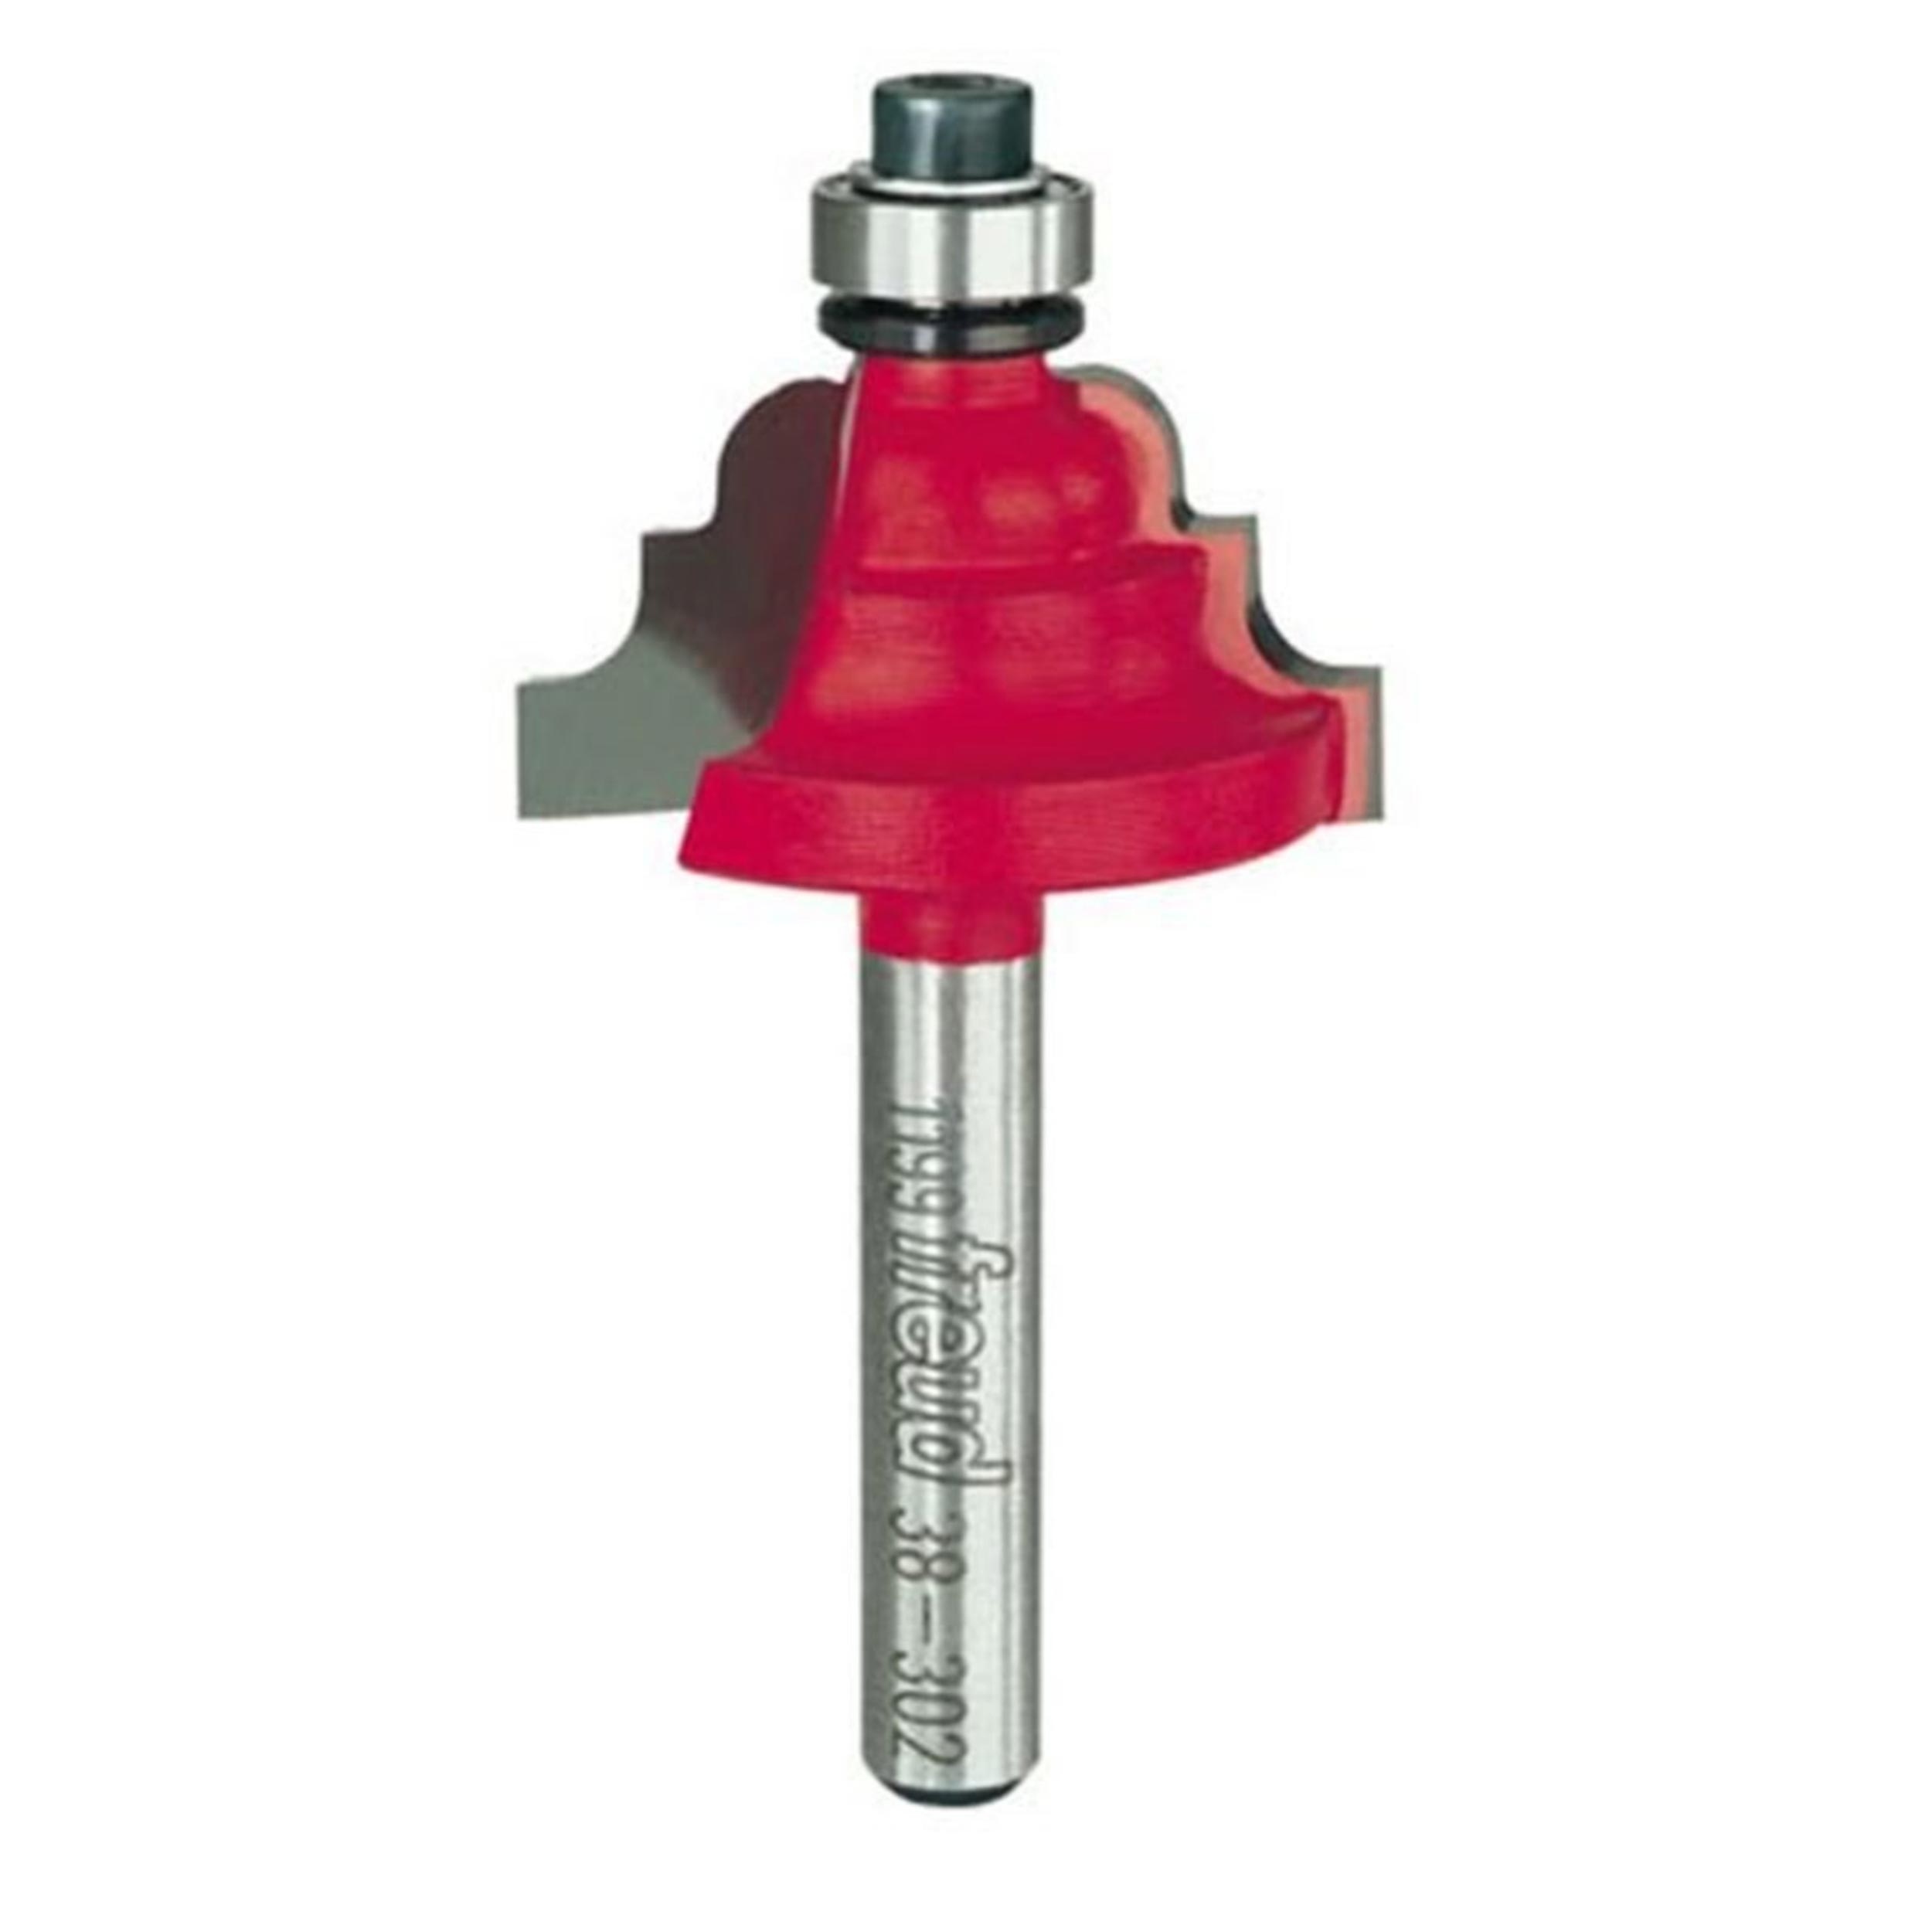 38-302 Cove And Bead Router Bit 1/8"r 1/4"sh